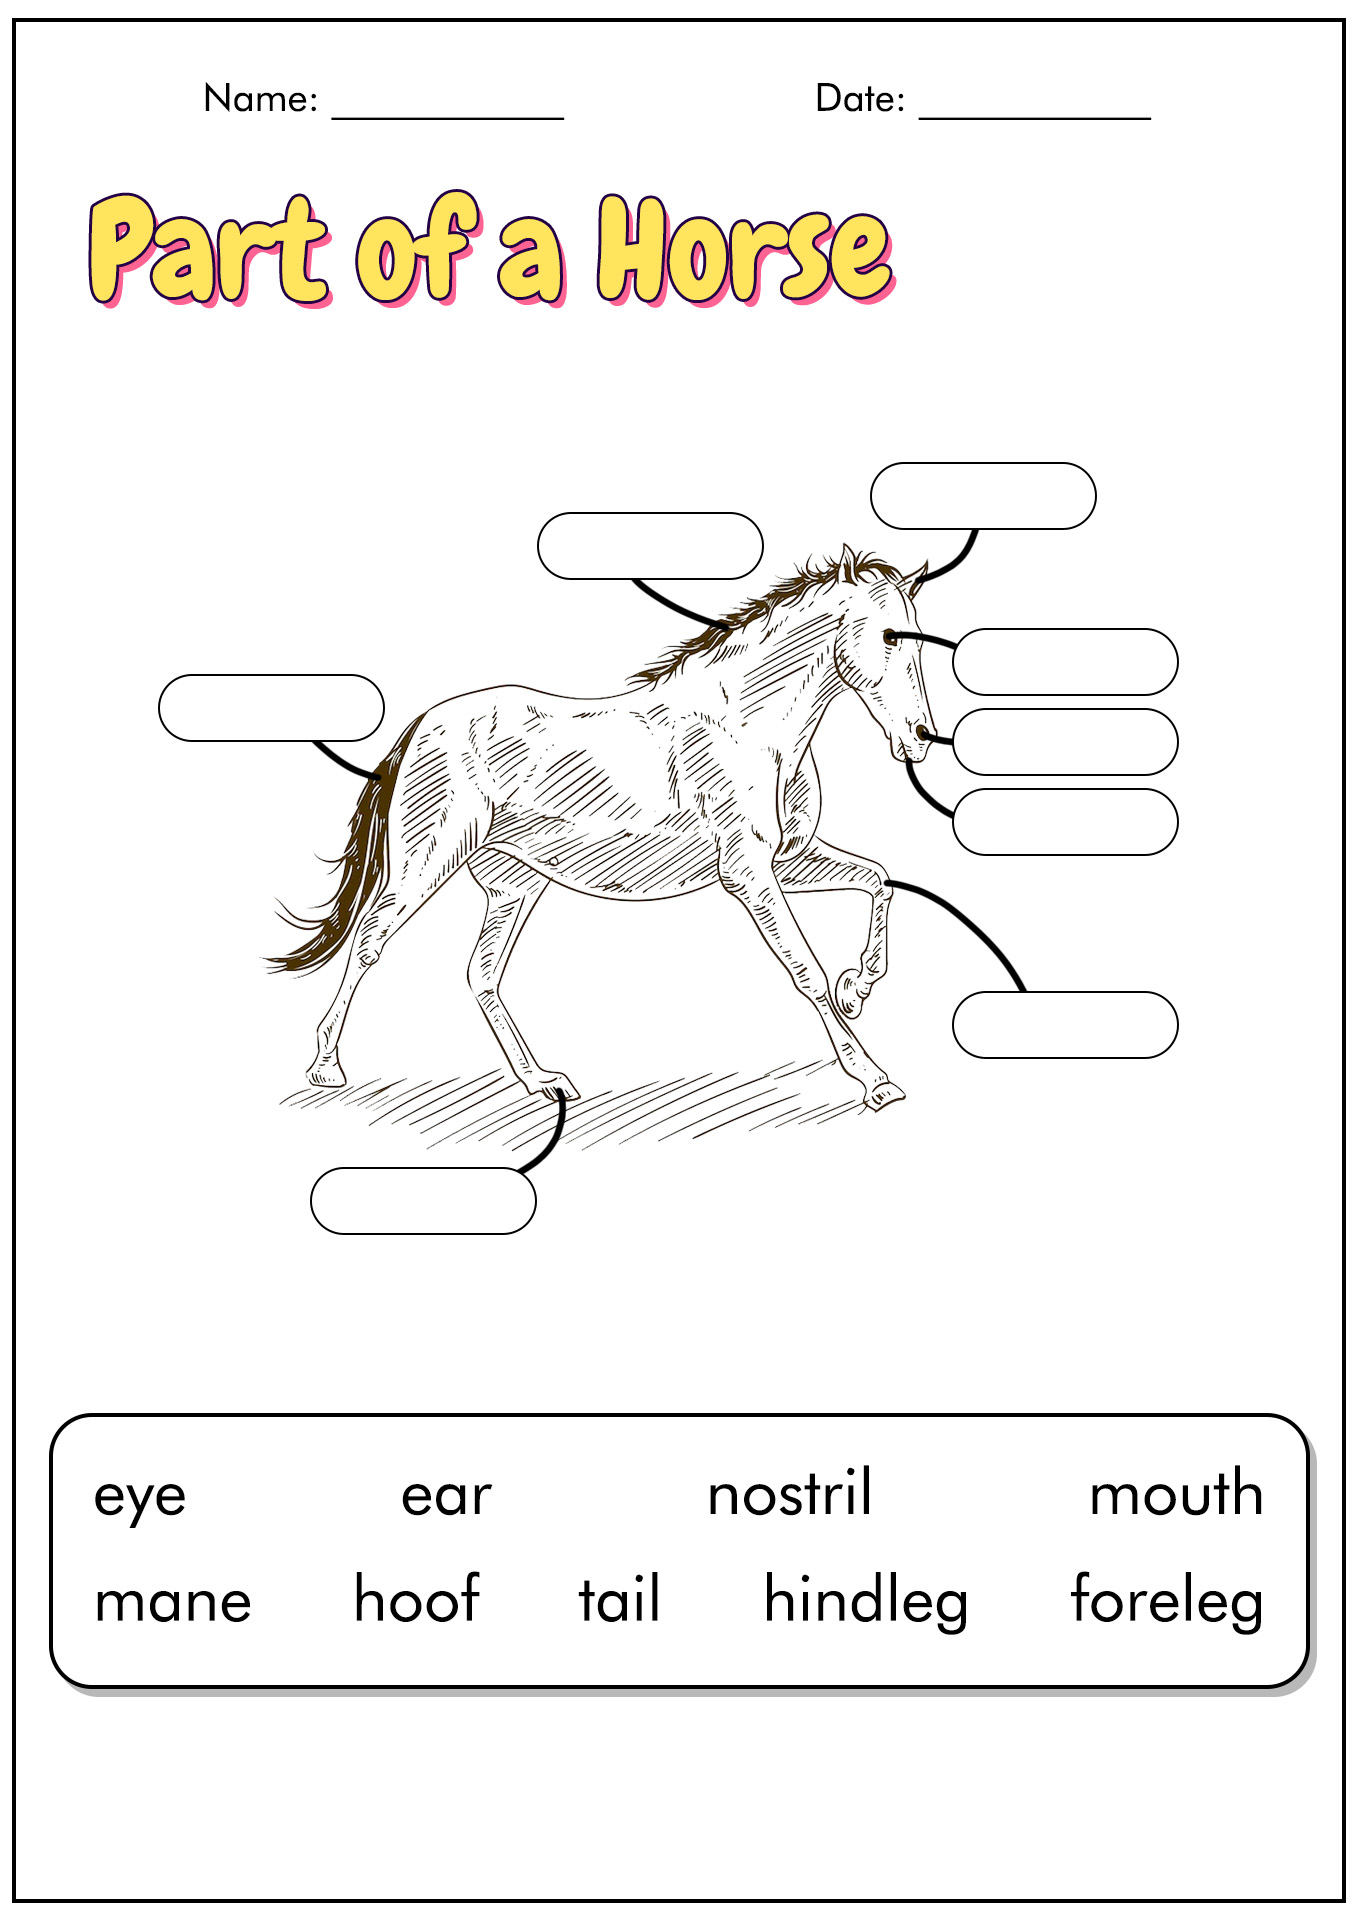 18 Best Images of Horse Study Worksheets Horse Riding Posture